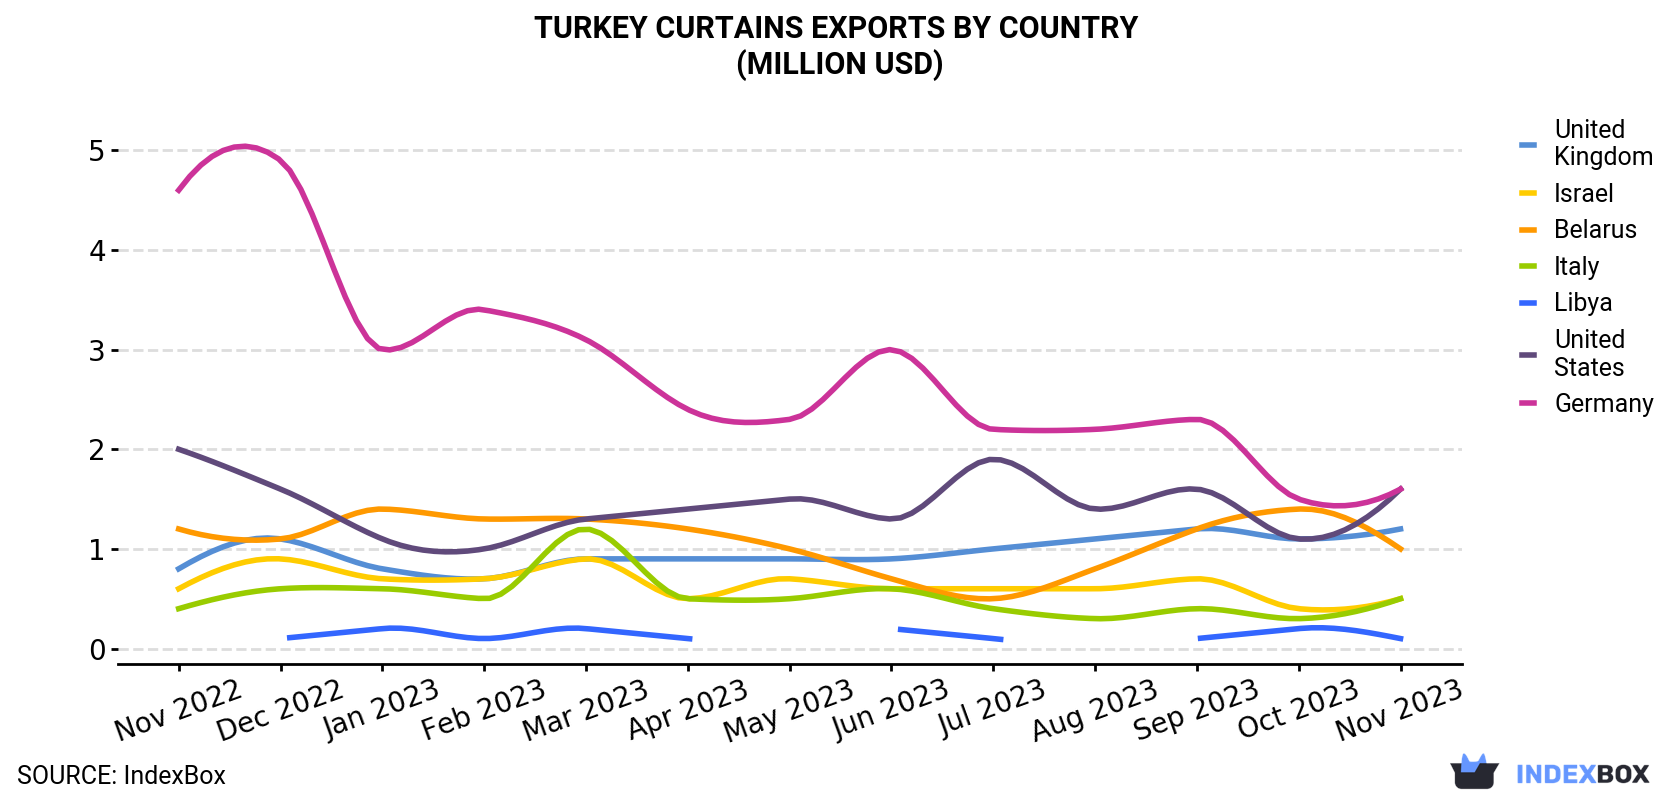 Turkey Curtains Exports By Country (Million USD)